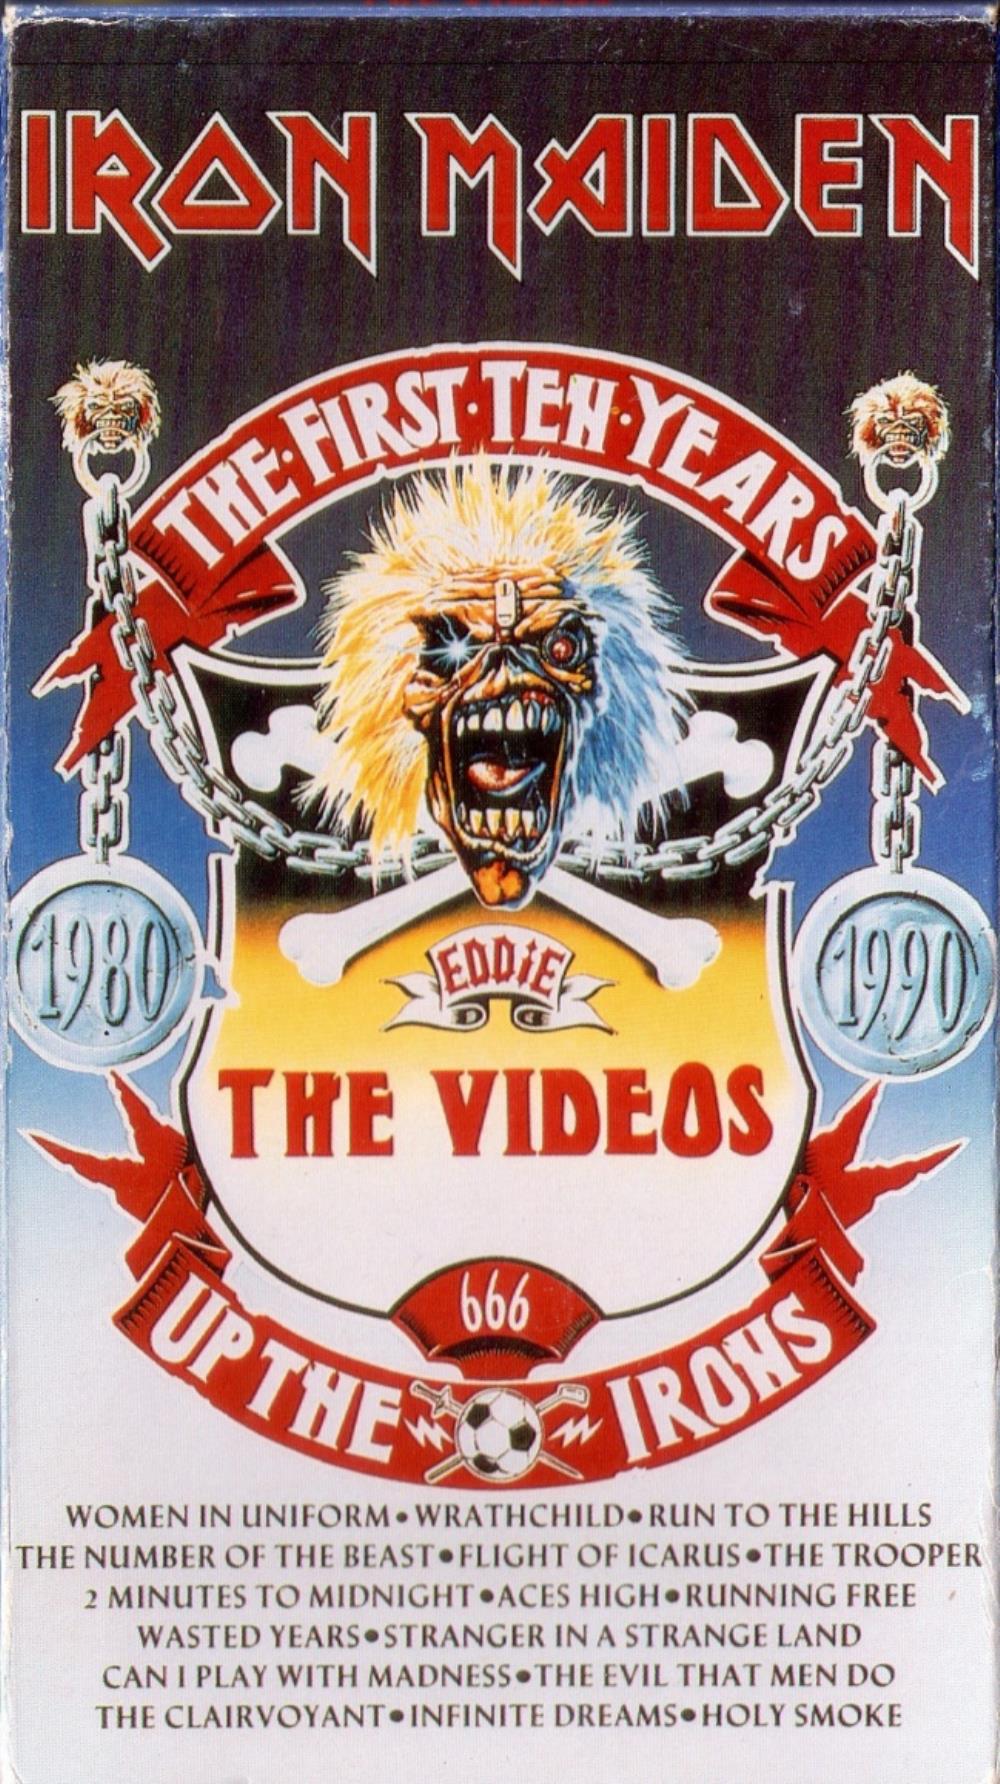 Iron Maiden The First Ten Years - The Videos album cover